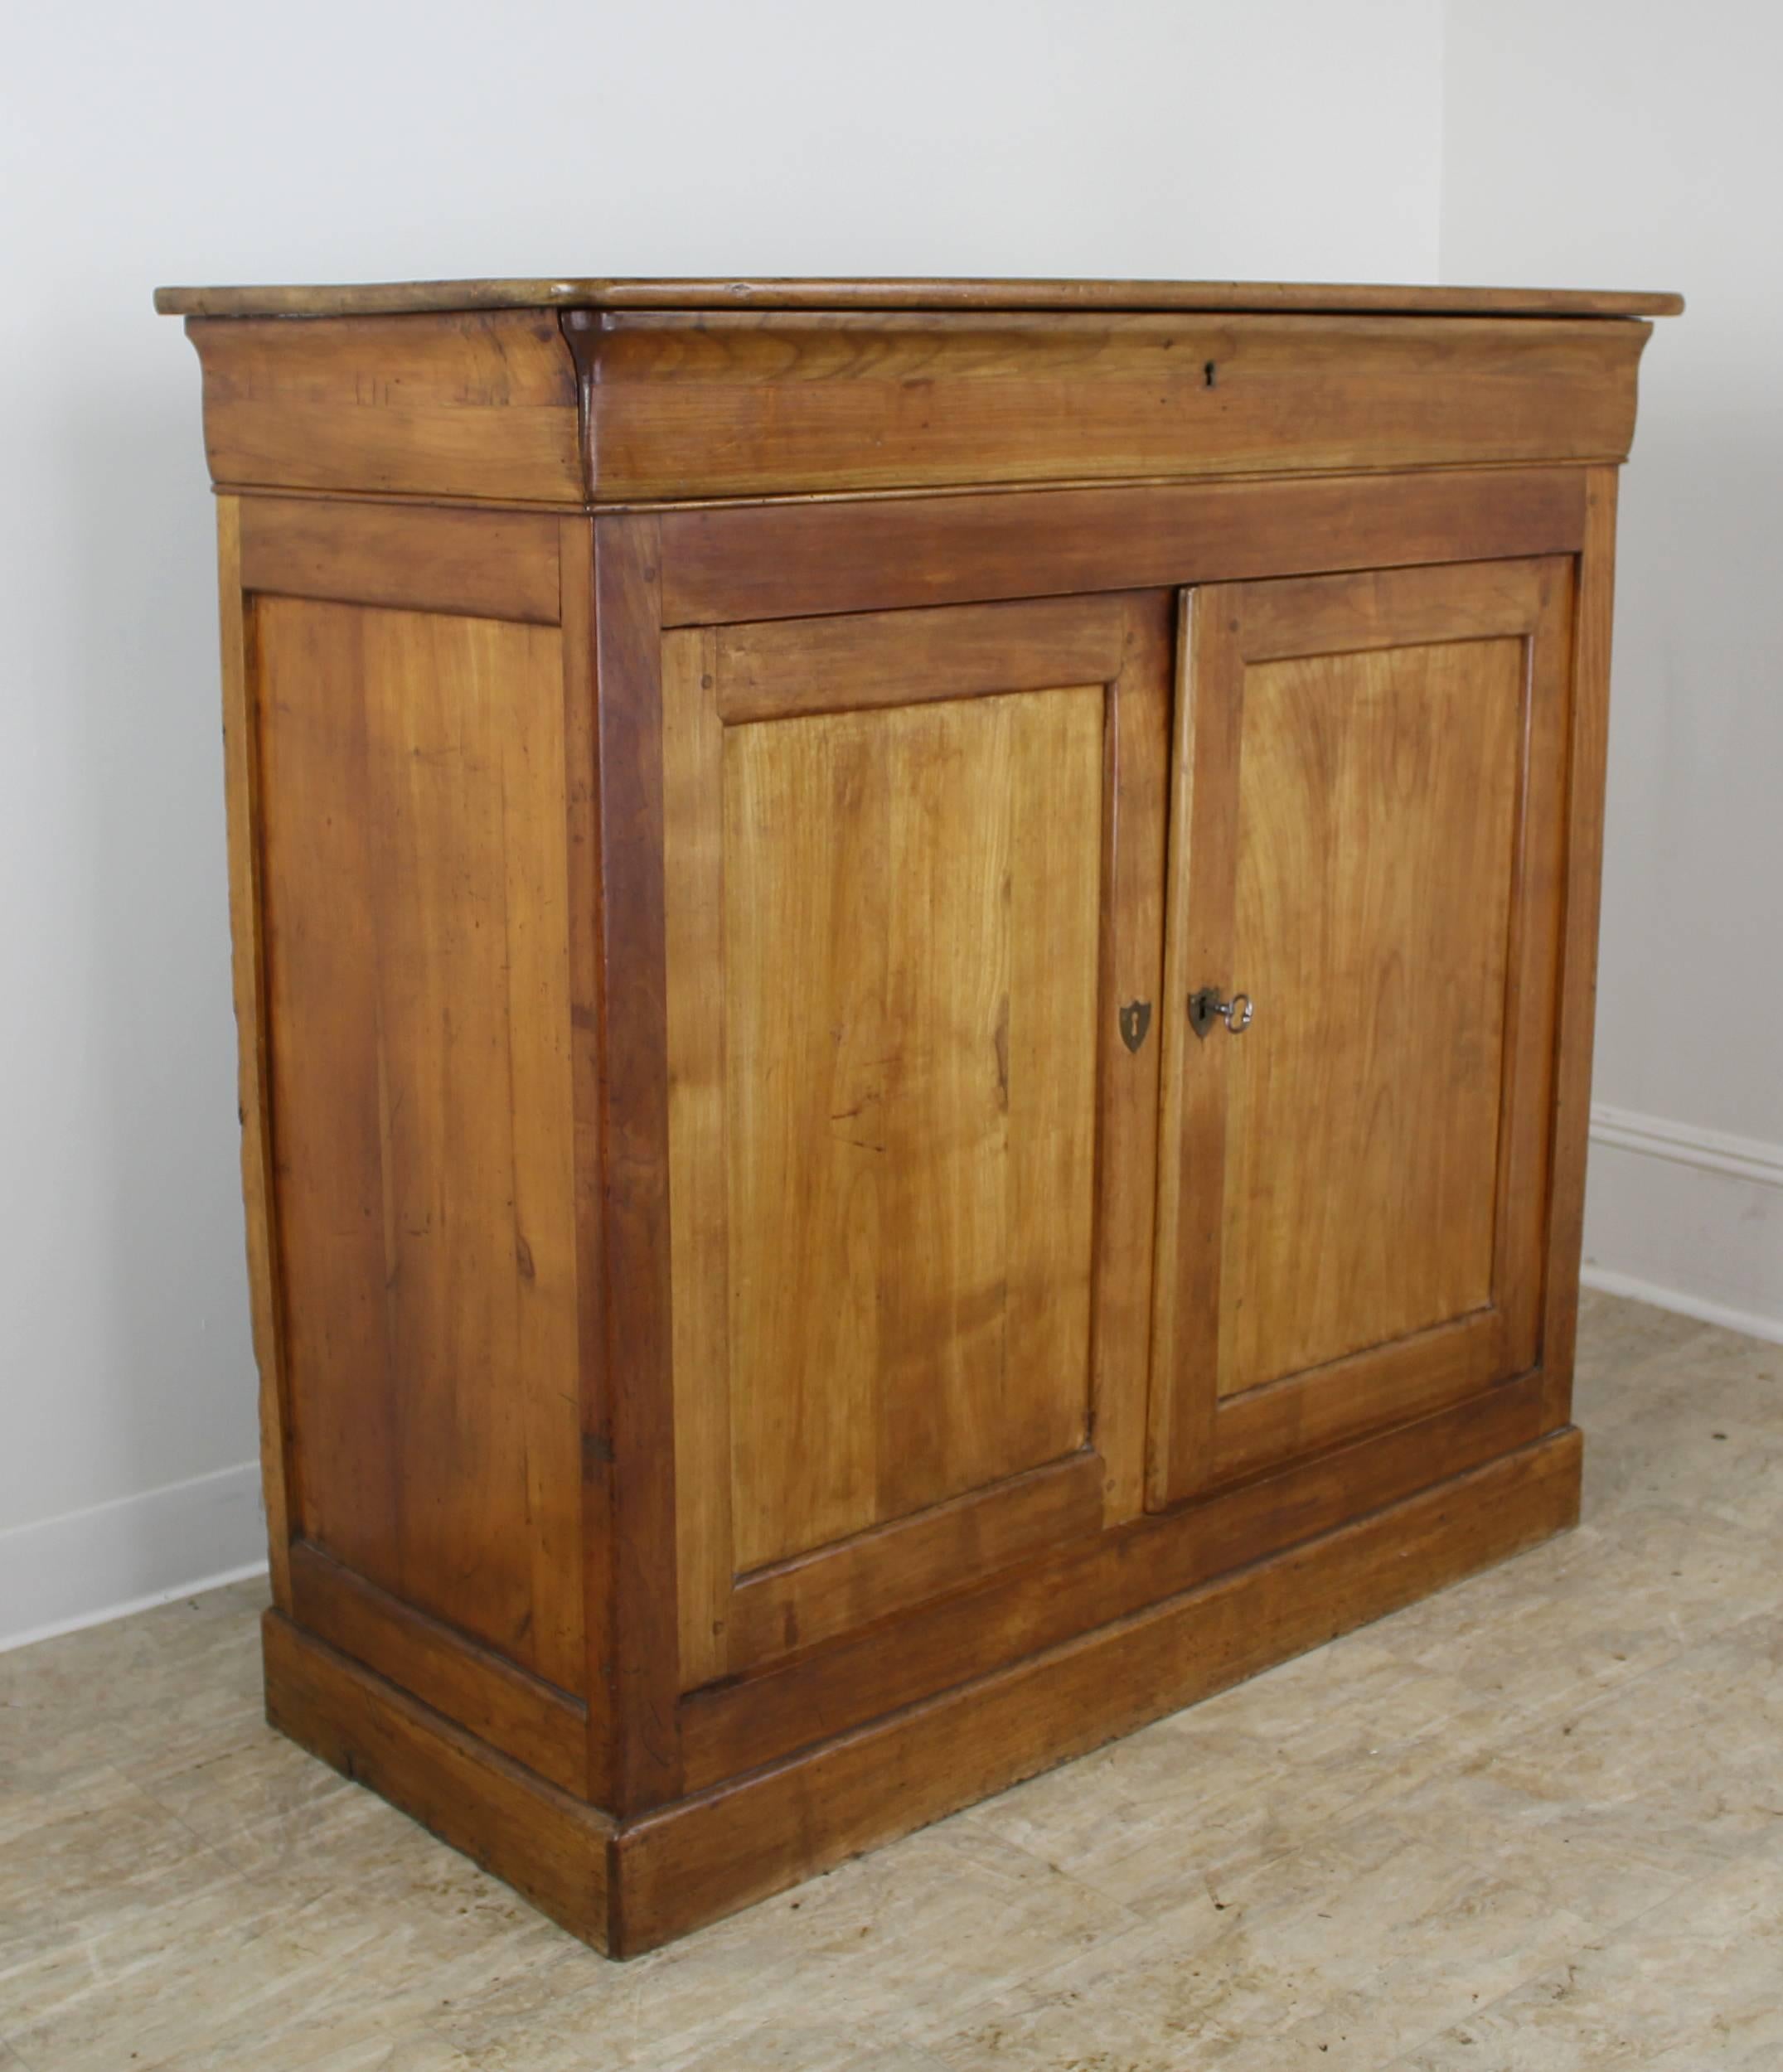 A taller buffet in warm cherry. This piece boasts classic features: nice baseboards at bottom, inset panels on the doors, and a hidden drawer in the crown molding. The two interior shelves provide excellent storage. We like the slimness of this